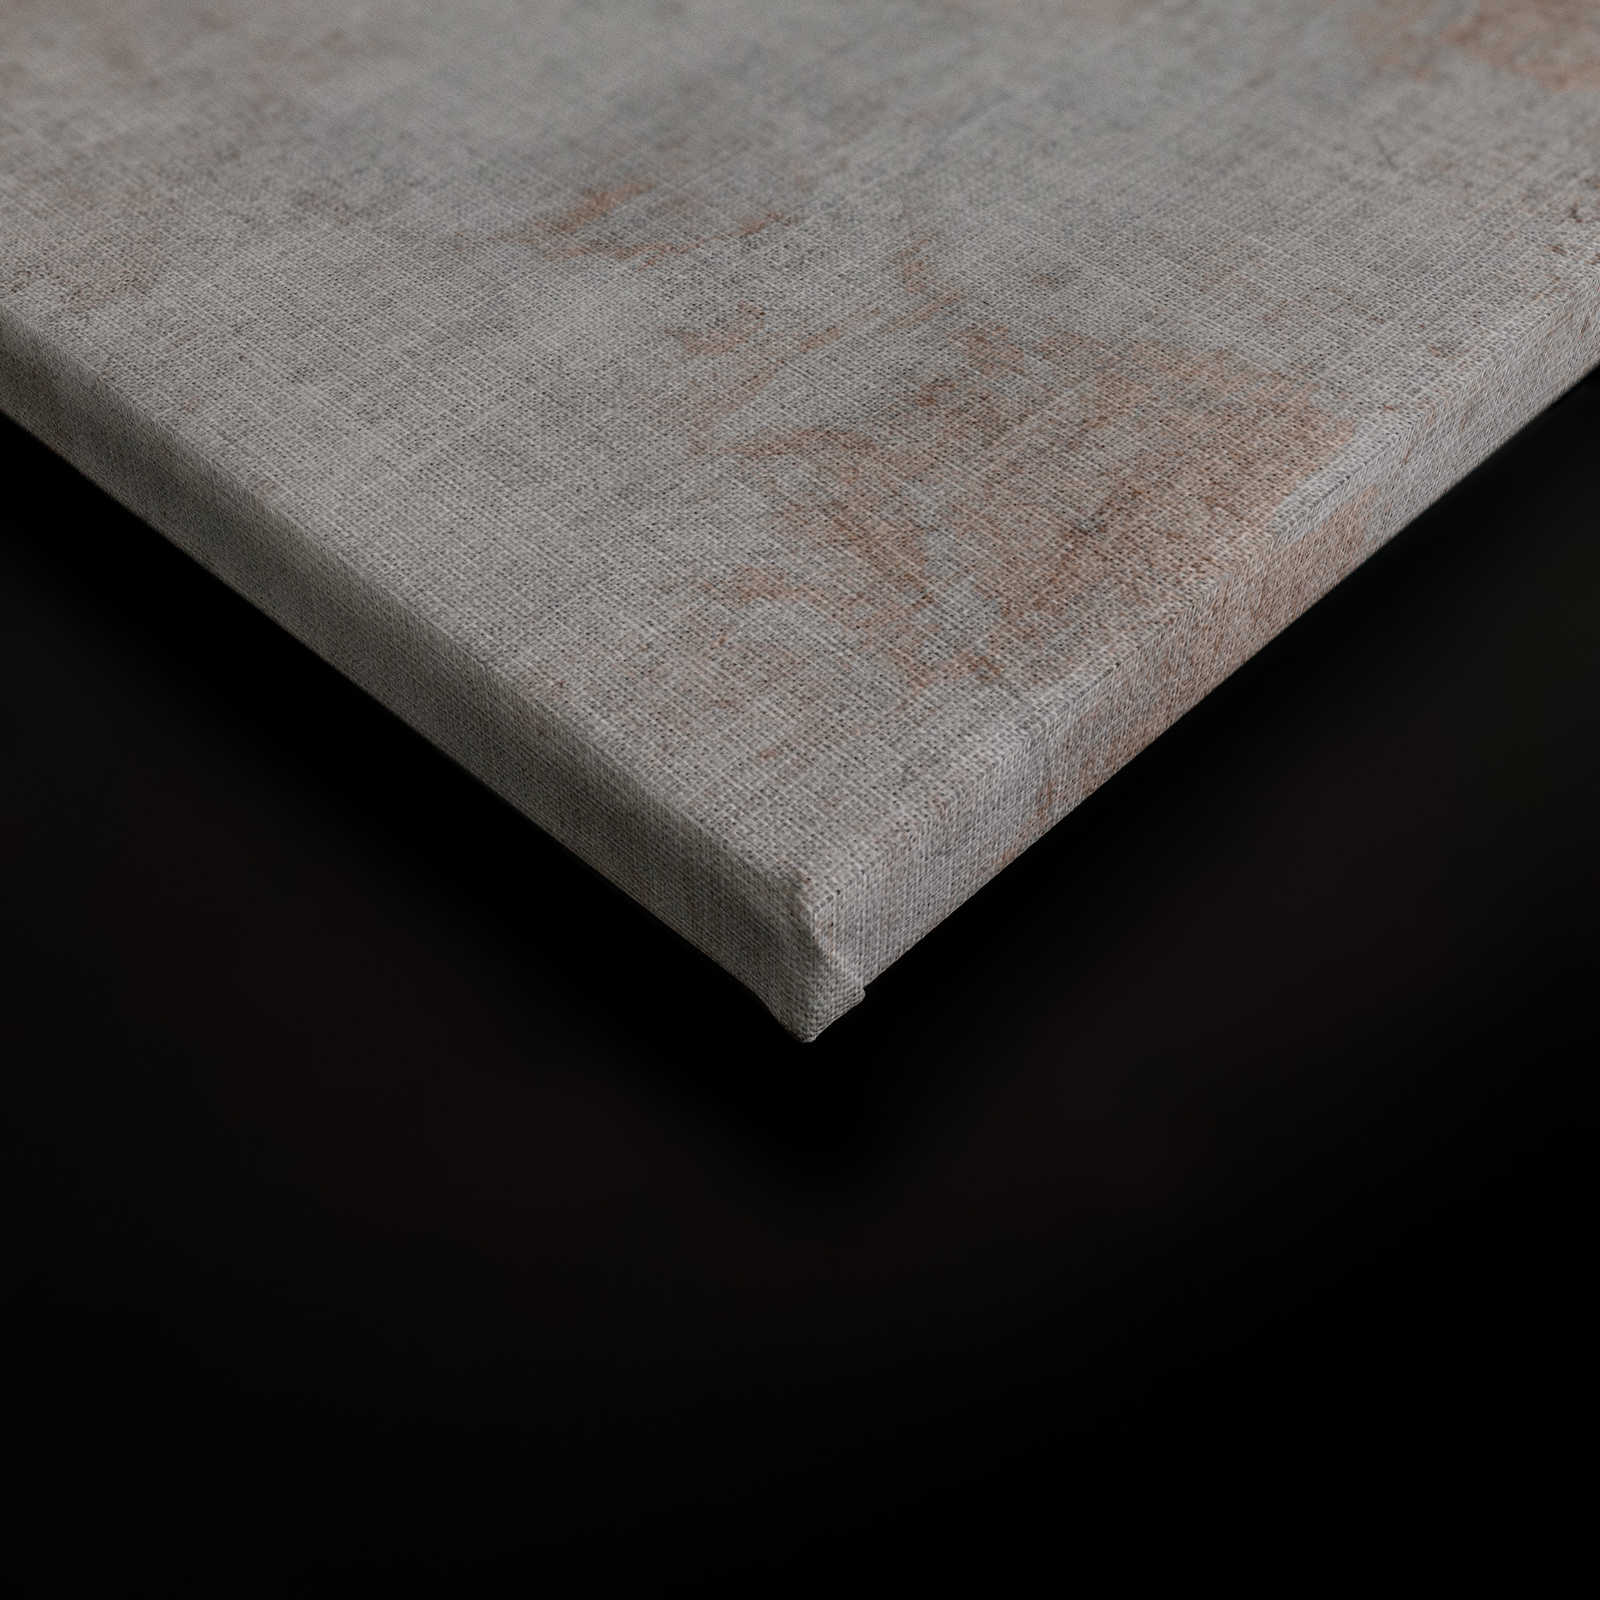             Big three 1 - Concrete-look canvas picture with wolf - natural linen structure - 0.90 m x 0.60 m
        